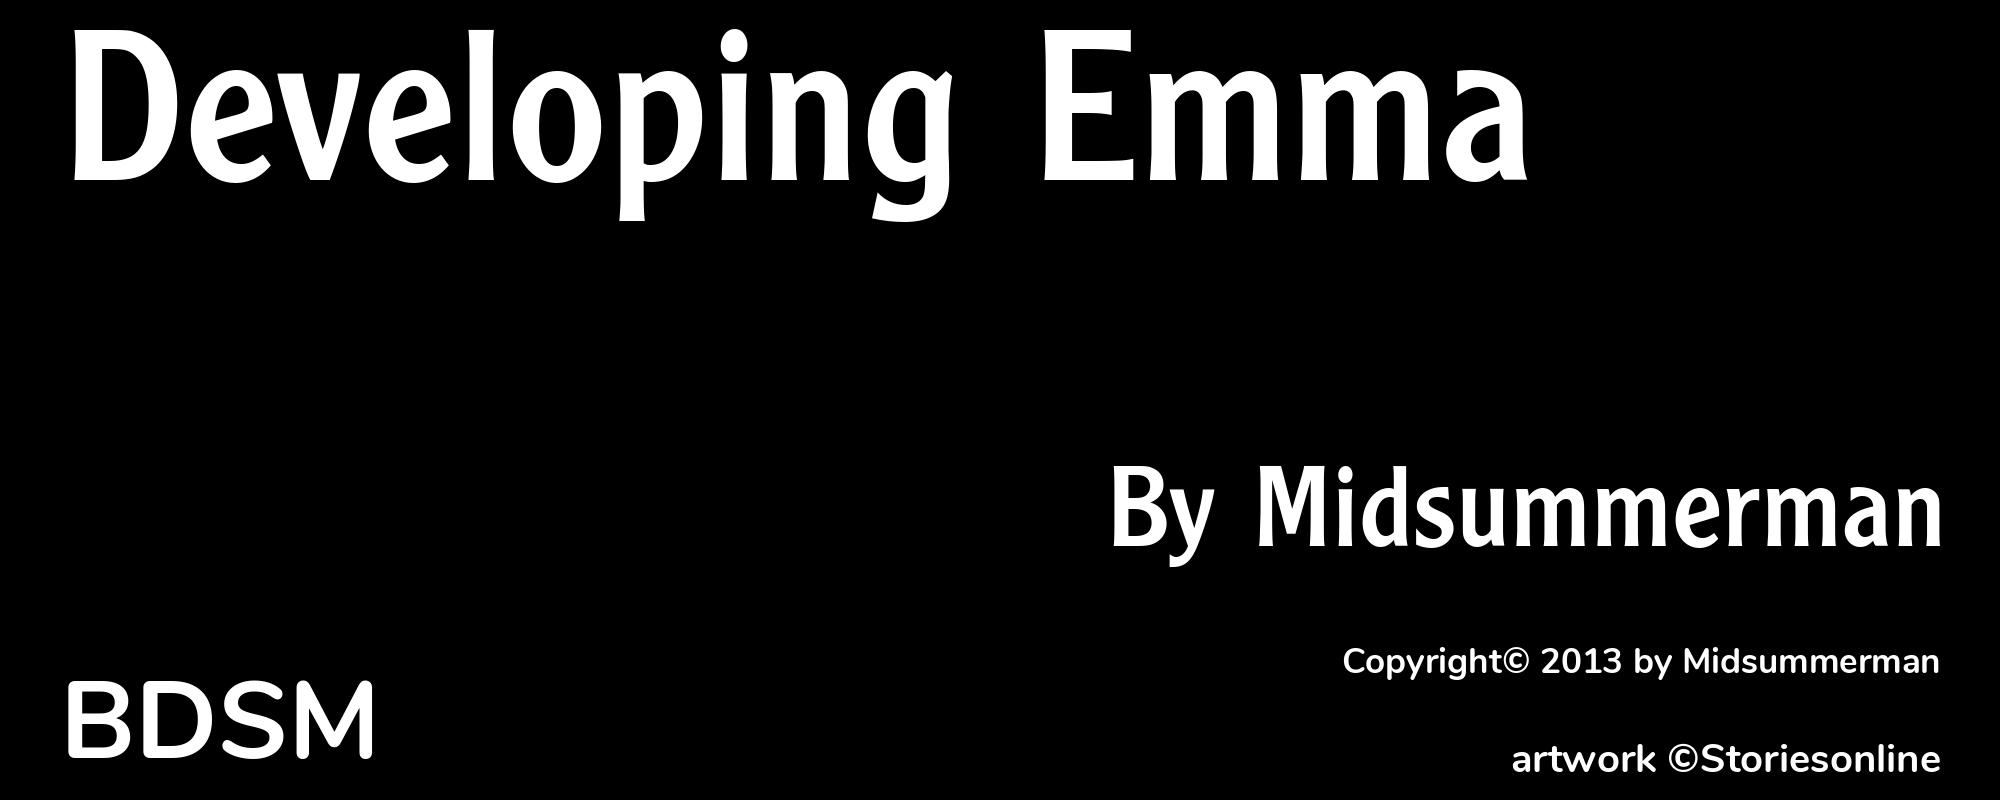 Developing Emma - Cover